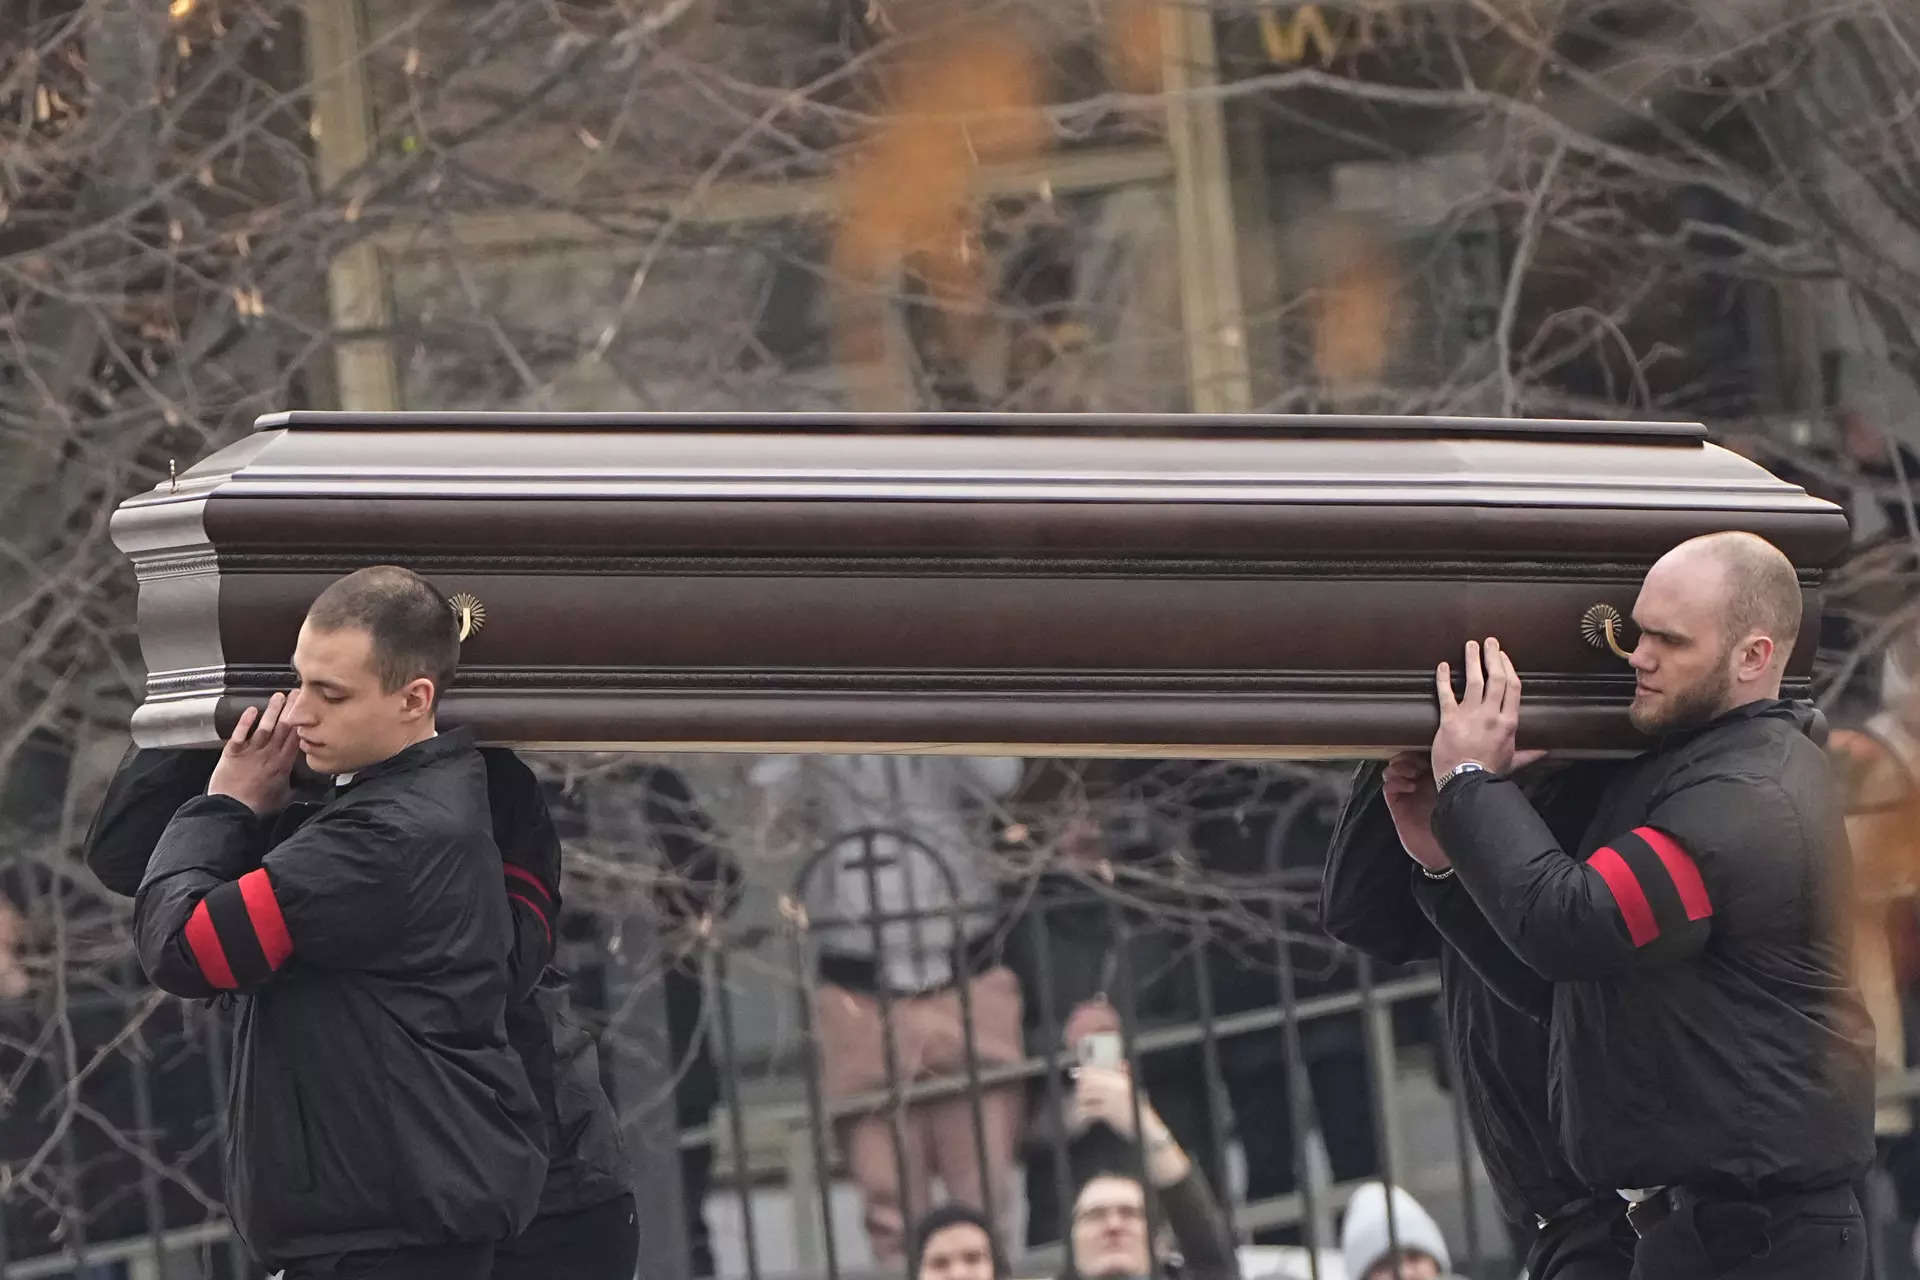 Alexei Navalny, who galvanised opposition to Putin, is laid to rest after his death in prison 